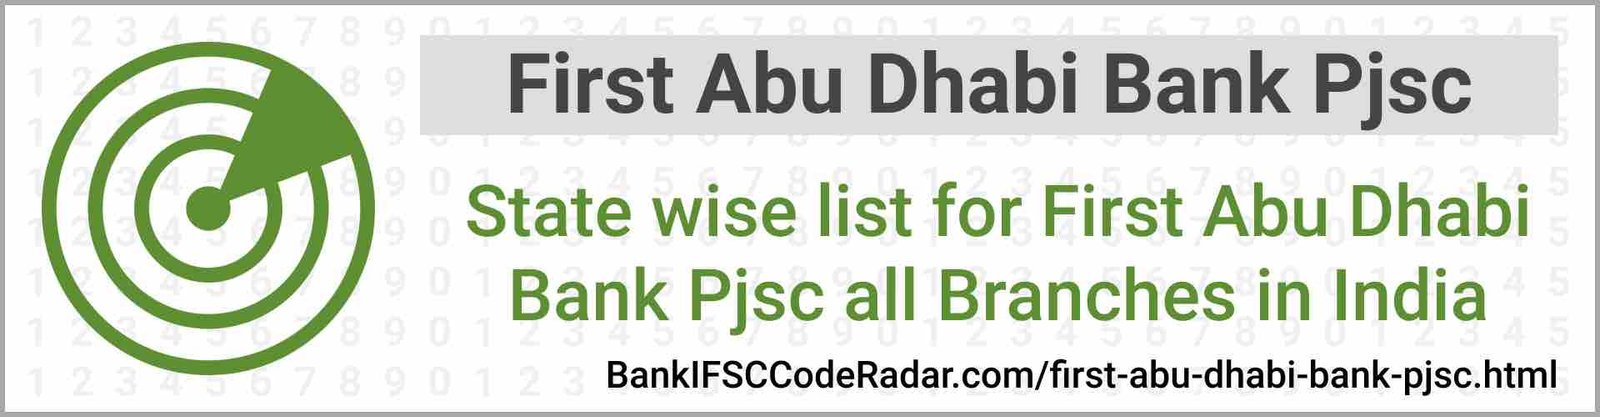 First Abu Dhabi Bank Pjsc All Branches India